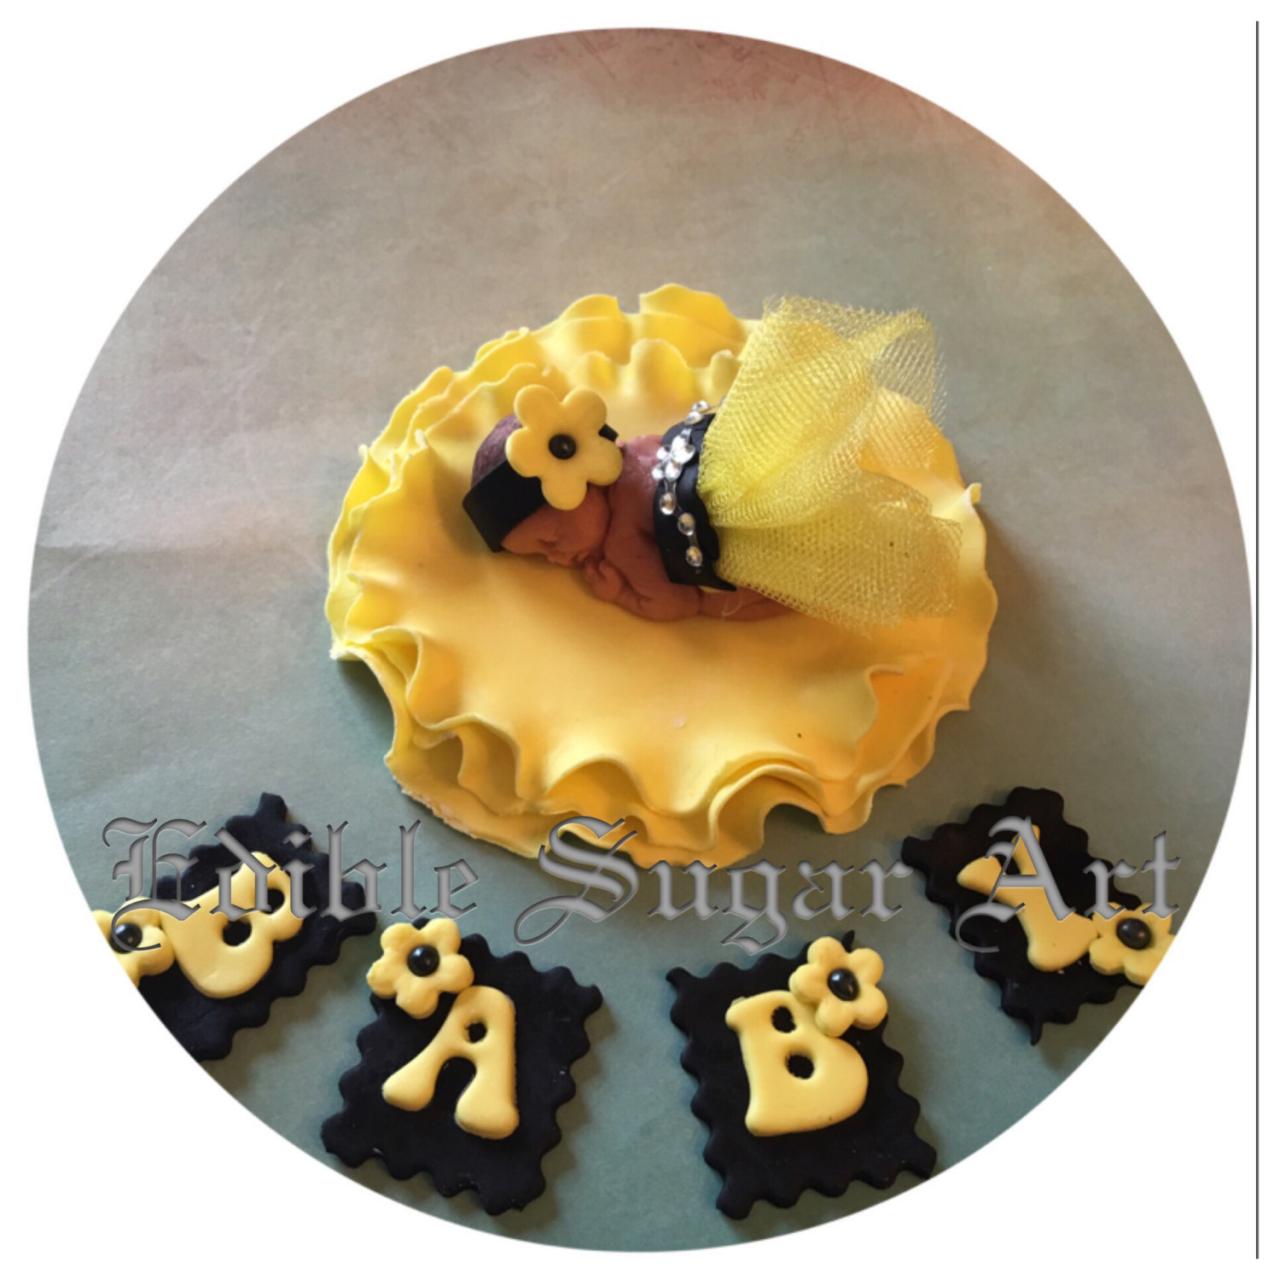 BUMBLE BEE BABY Shower Cake topper fondant toppers baby shower first birthday bumble bee Nursery flower decorations favors edible toppers